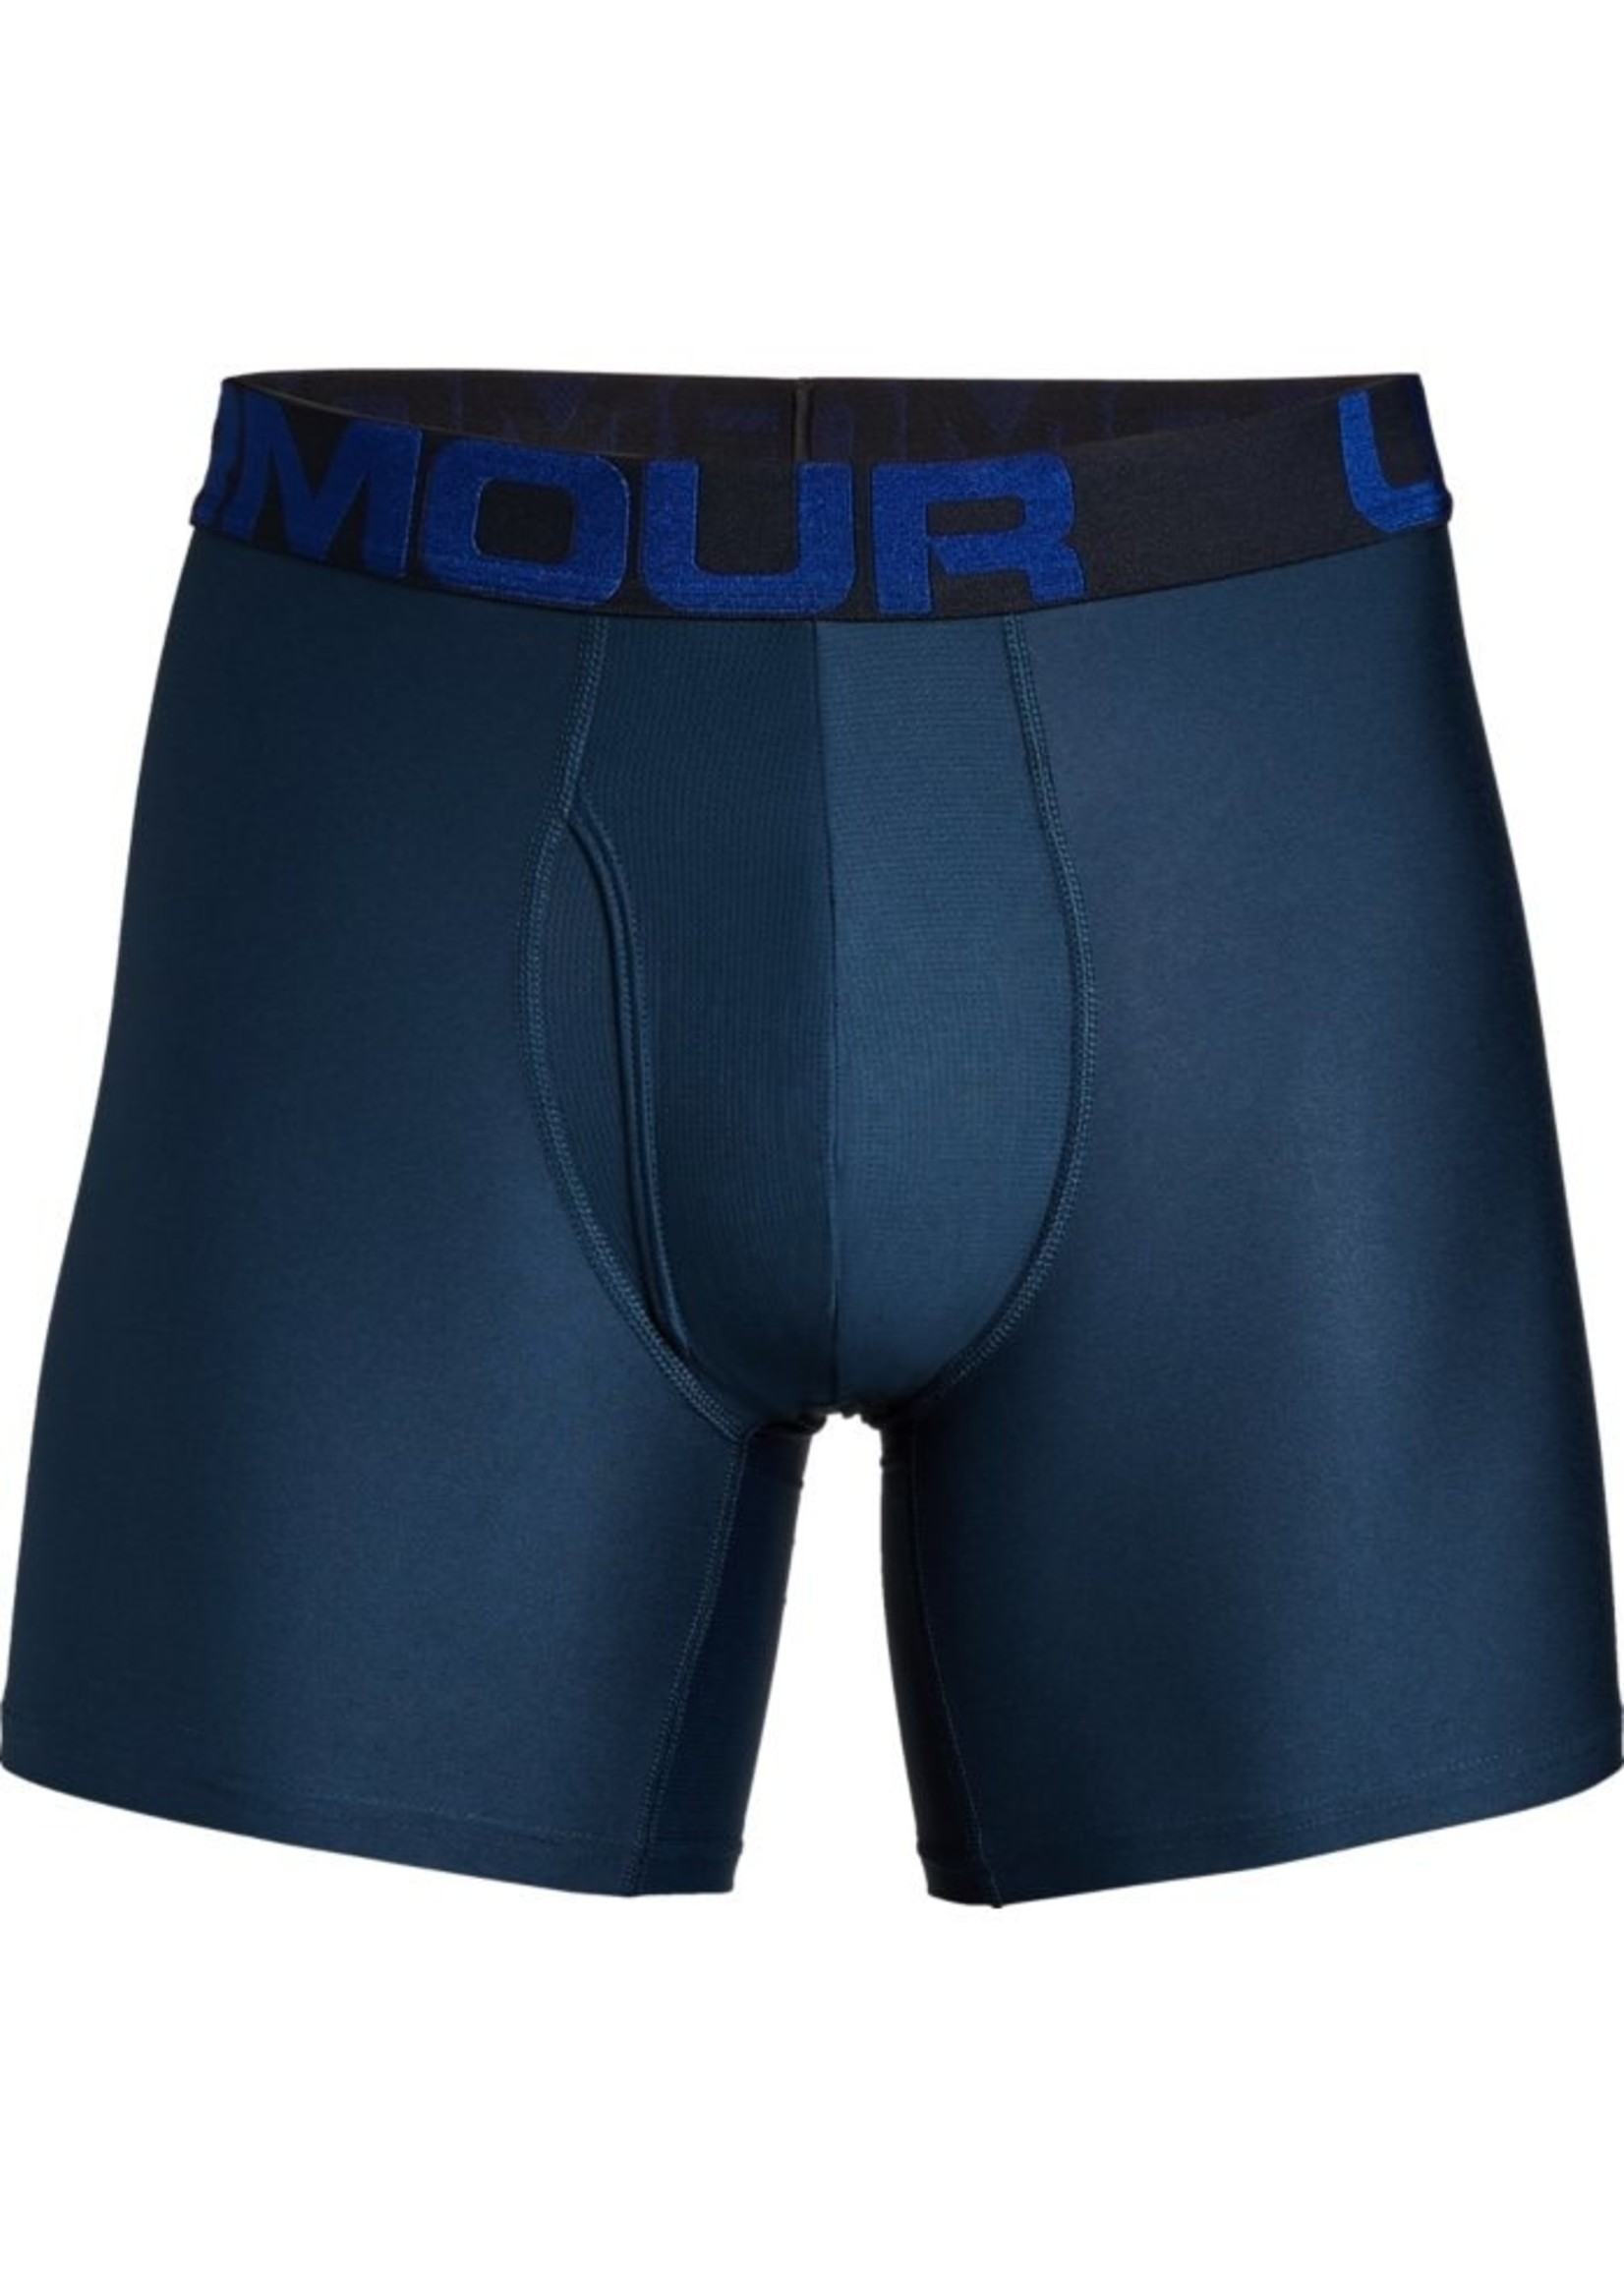 Under Armour: Spandex Boxers (Set of 2) Ultra Blue